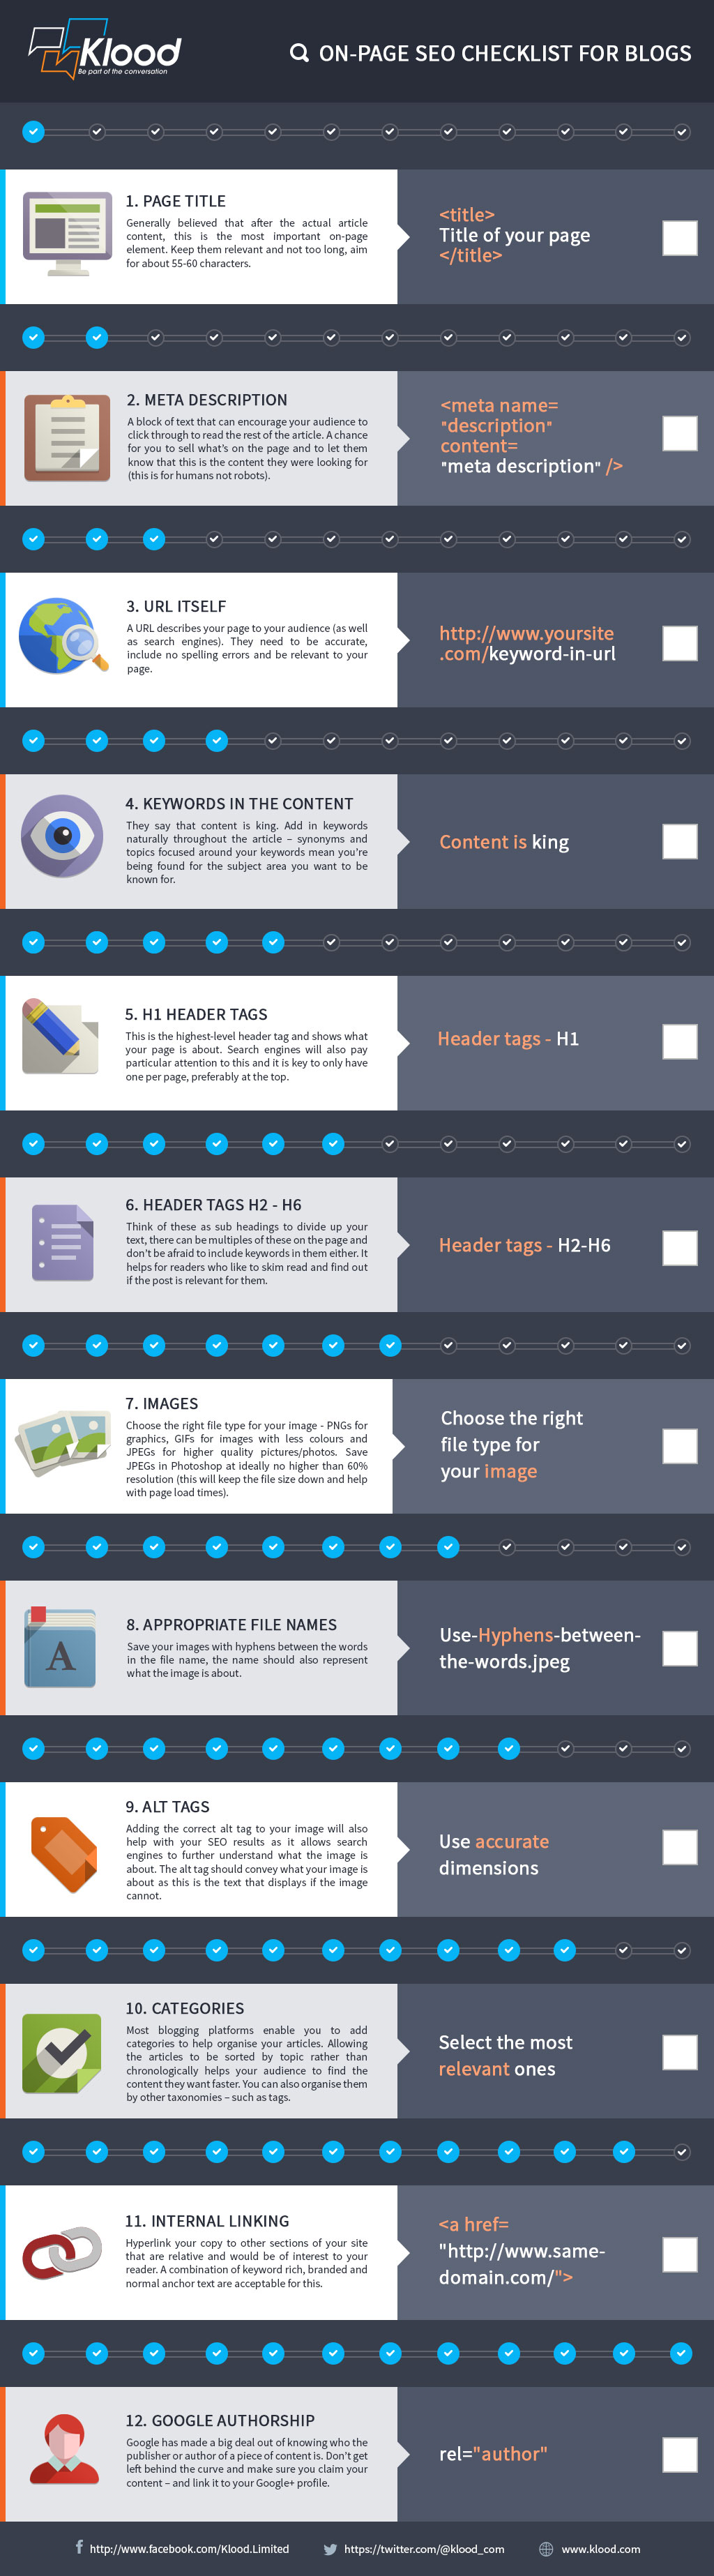 On-Page SEO Checklist for Blogs